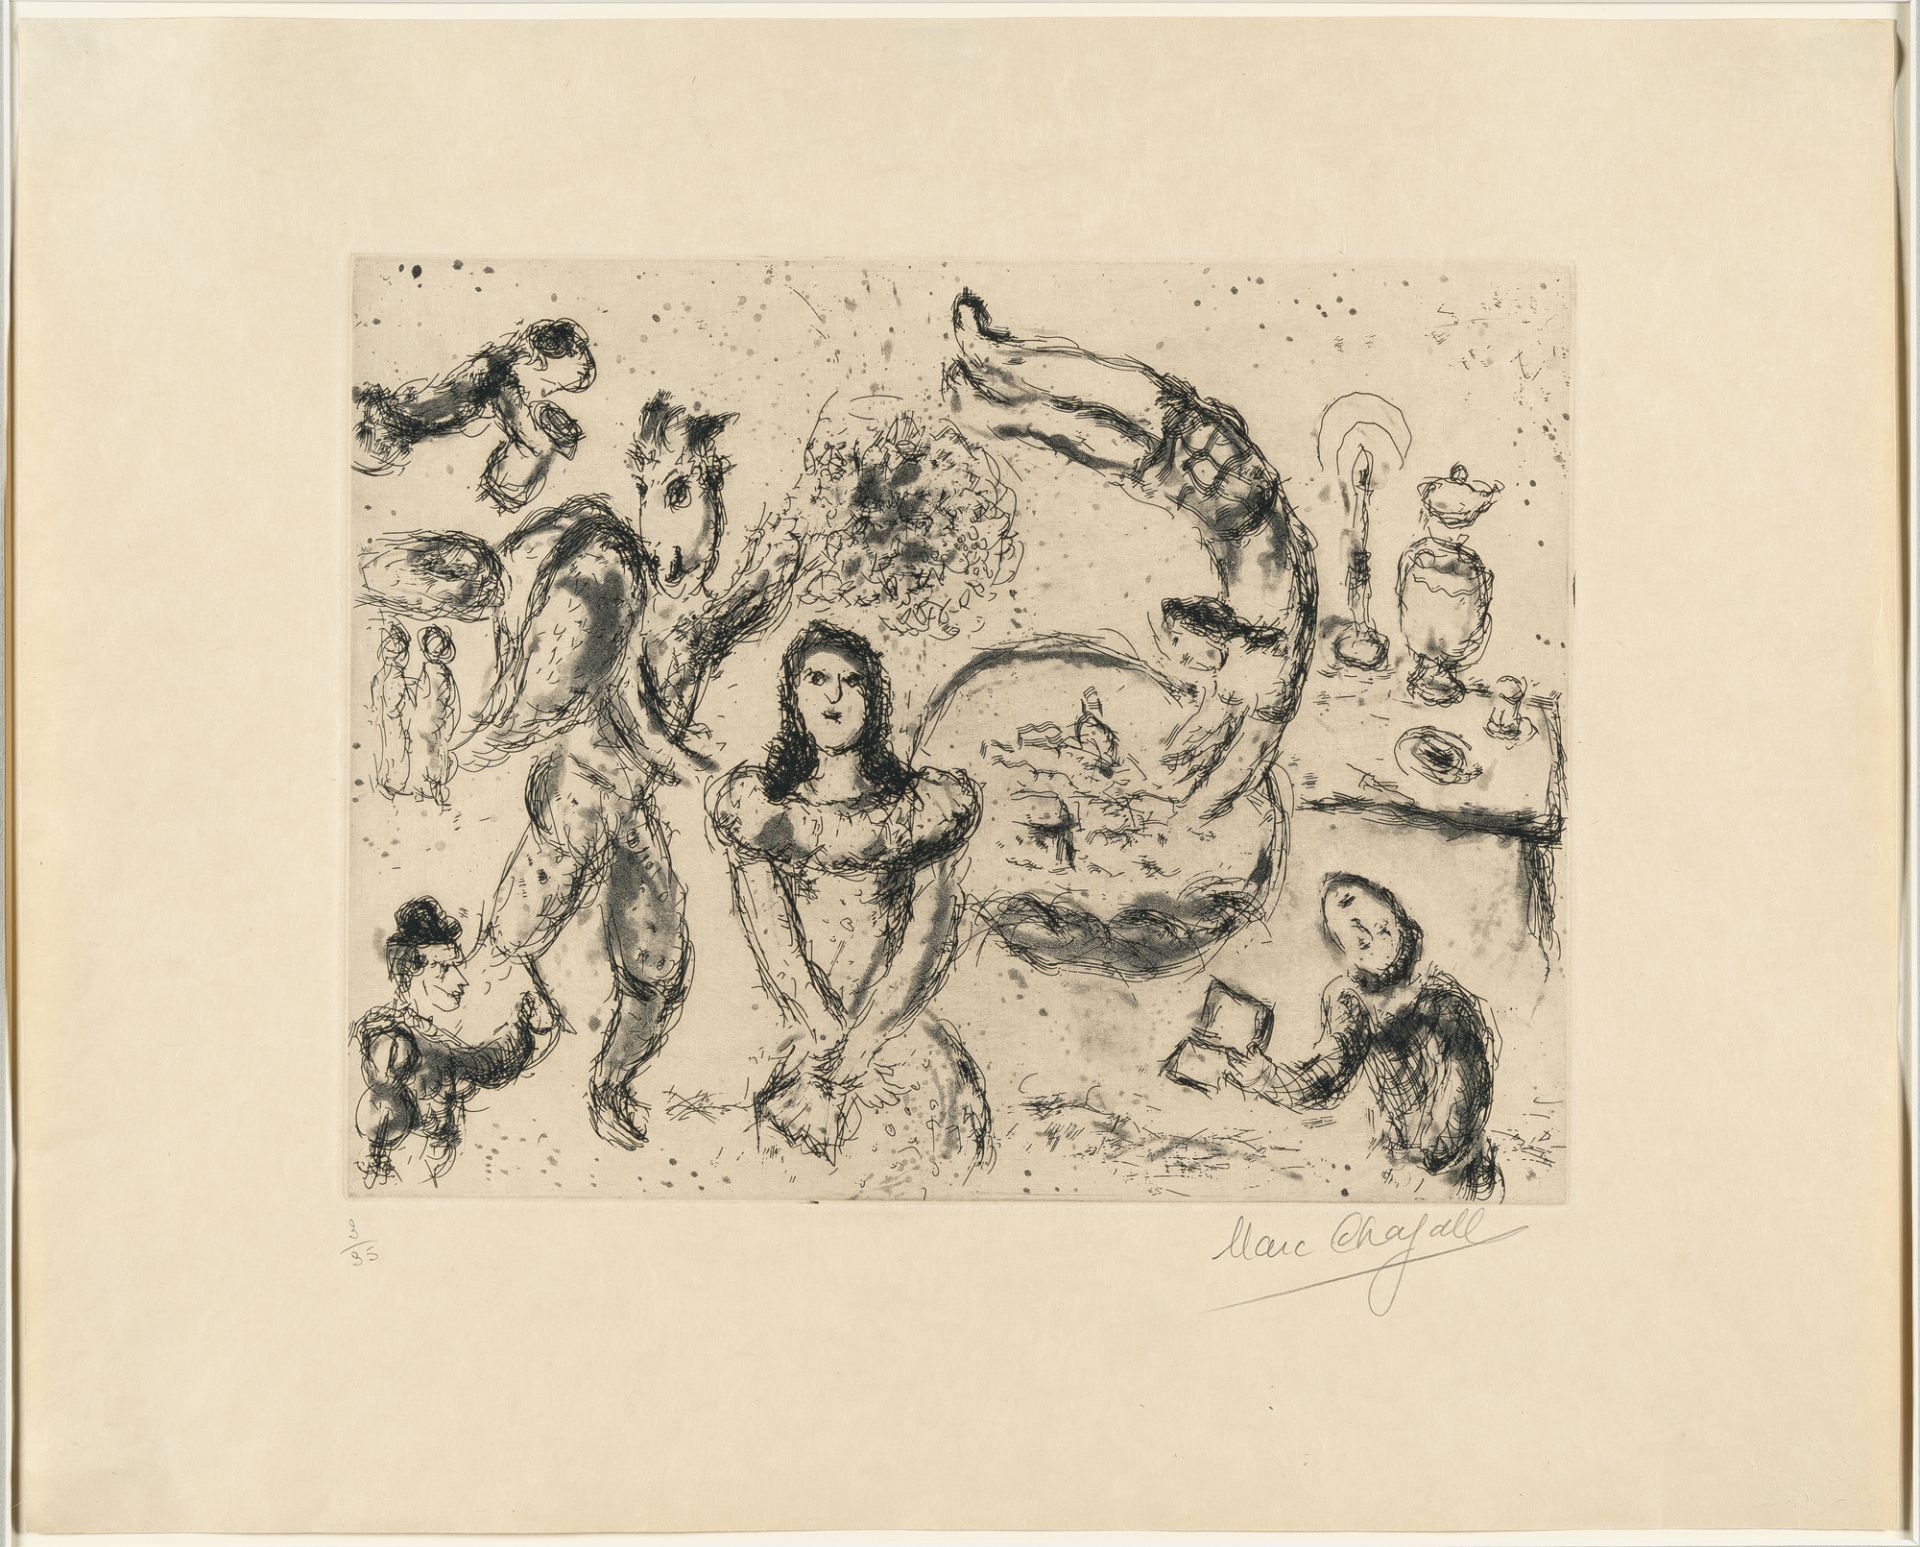 Marc Chagall (1887 Witebsk - Saint-Paul-de-Vence 1985), L'acrobate au villageEtching with aquatint - Image 2 of 4